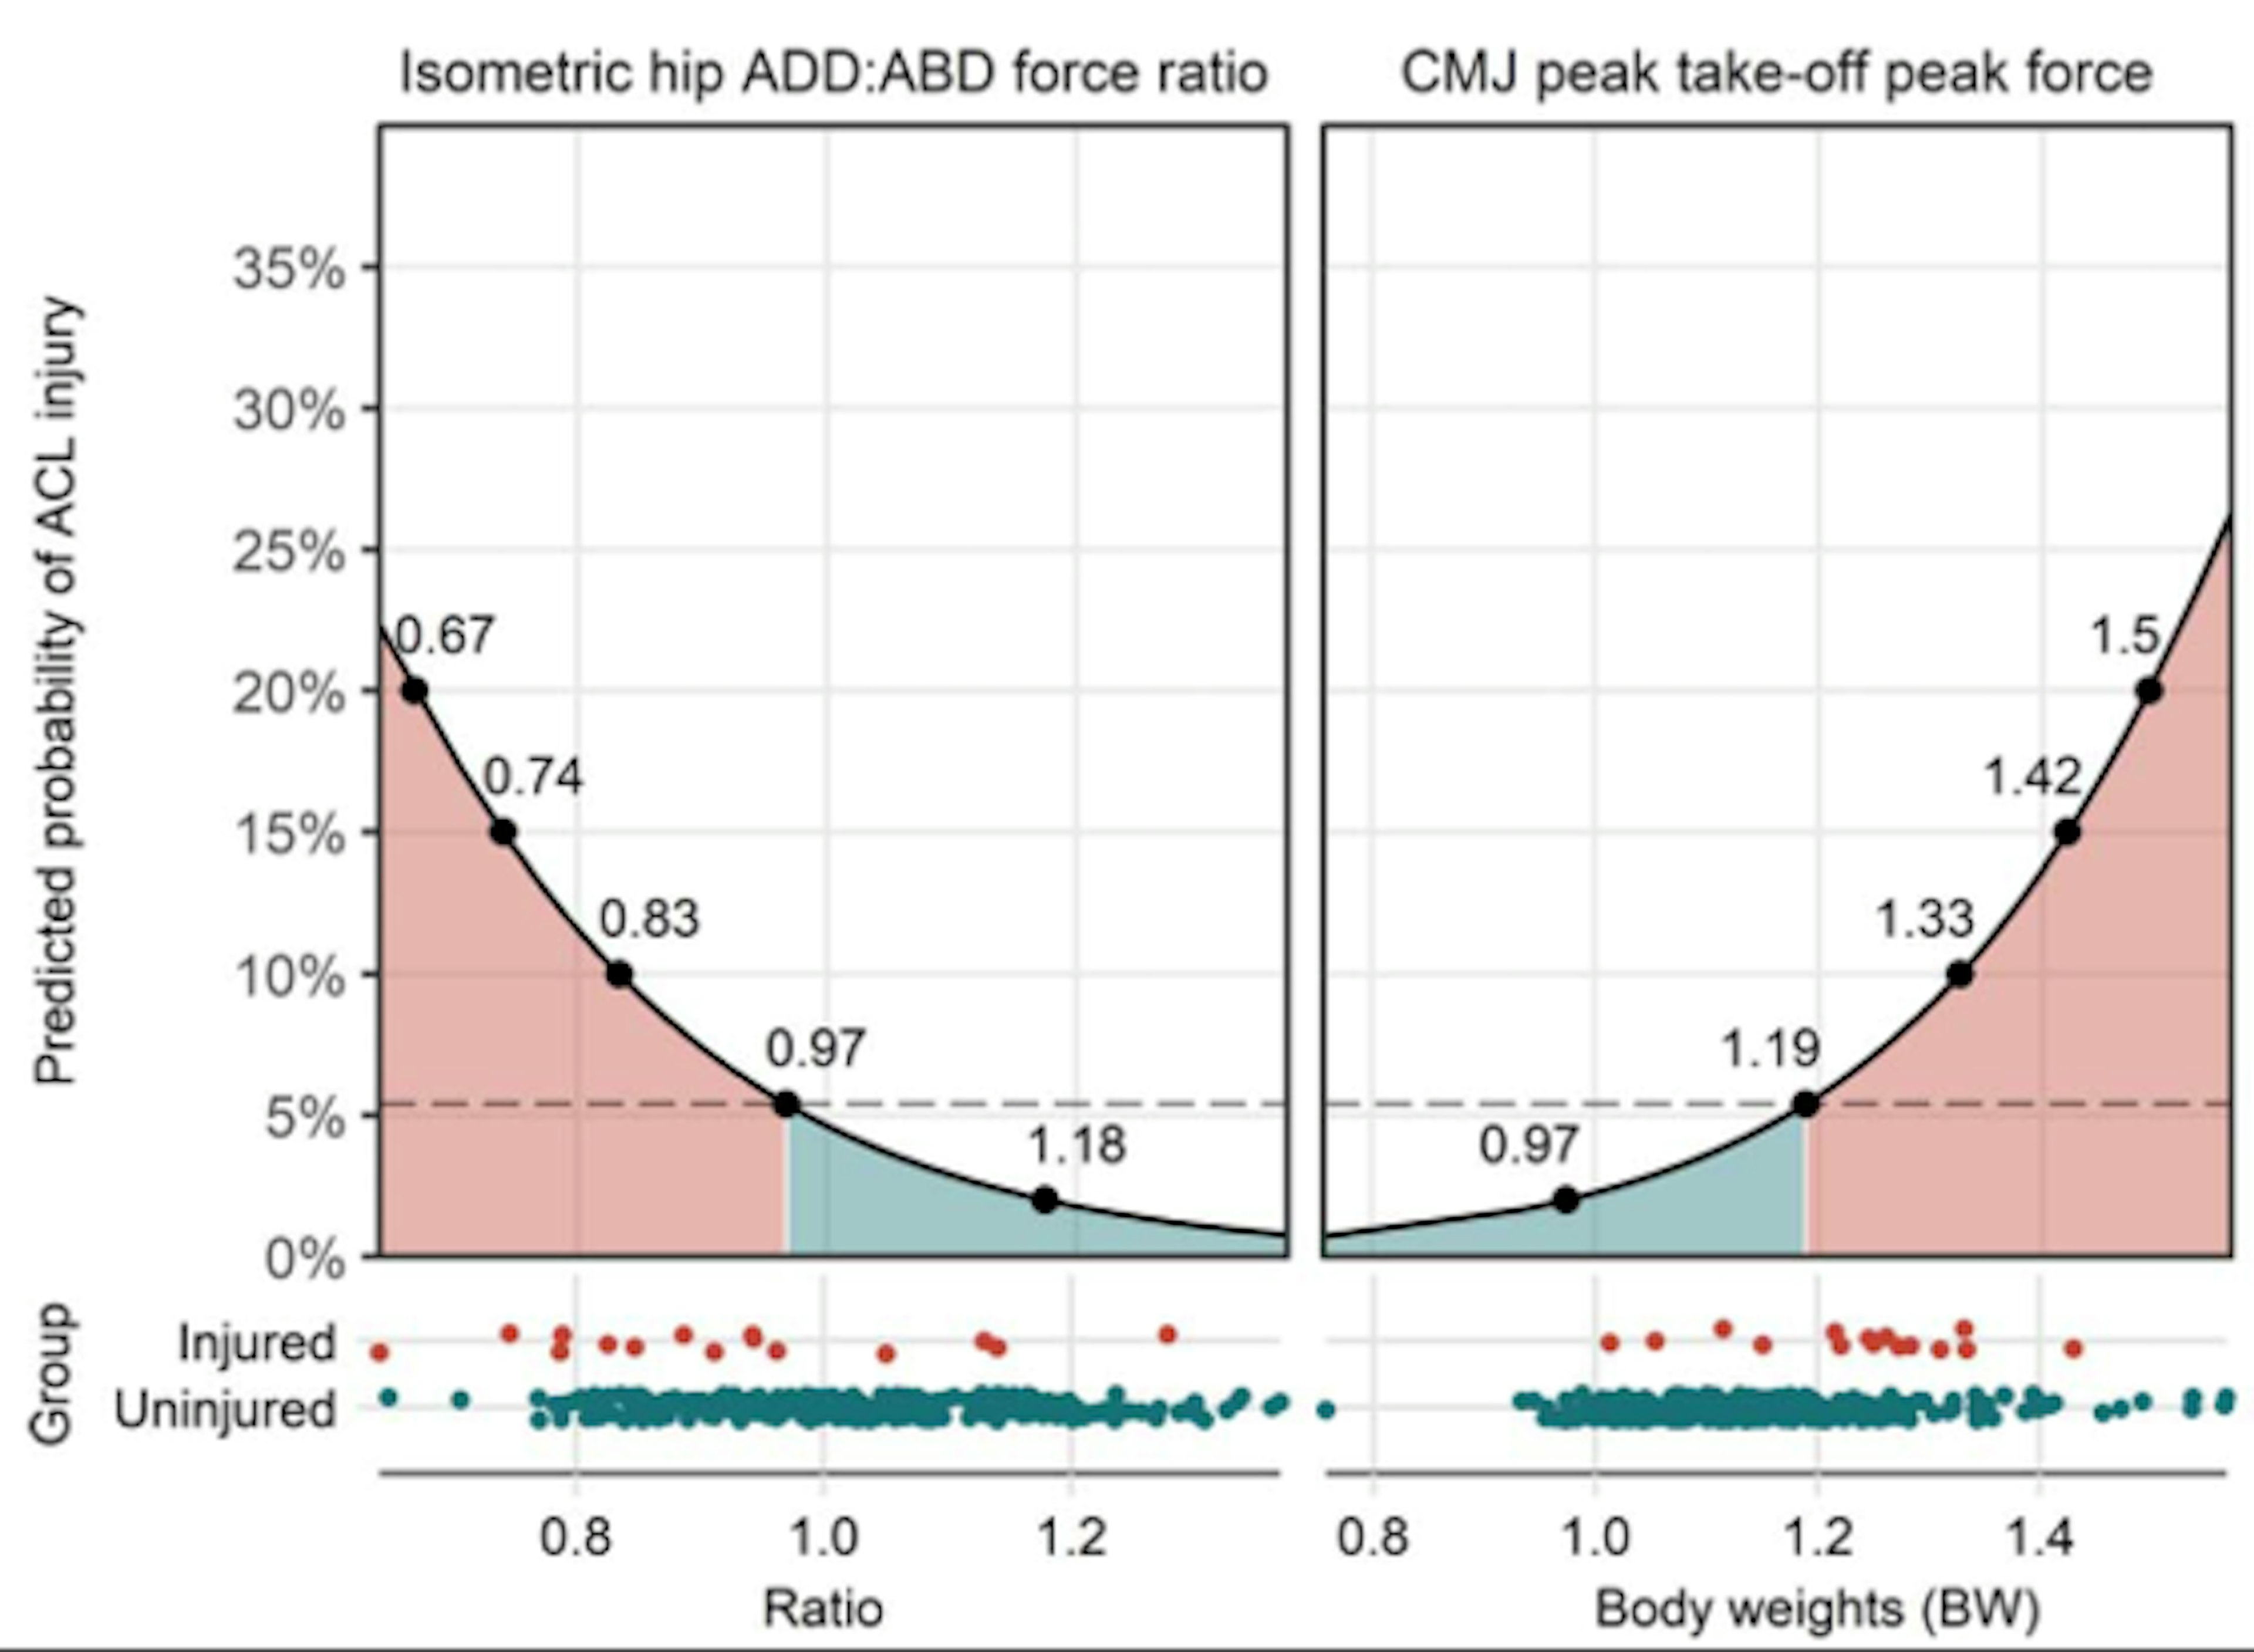 Figure 3. Predicted probability of sustaining an ACL injury over a range of strength and biomechanics values. Predicted probabilities derived from univariable (unadjusted) logistic regression models. Horizontal dashed line indicates base risk (5.4%), and the intersection with predicted probability indicates the value at which ACL injury risk increases/decreases relative to base risk. Values corresponding with 2%, 5.4%, 10%, 15%, and 20% predicted probabilities of ACL injury are highlighted on the curve with black dots. Bottom panel displays the distribution of individual ACL injured and uninjured data. Figure replicated from Collings et al 2022.